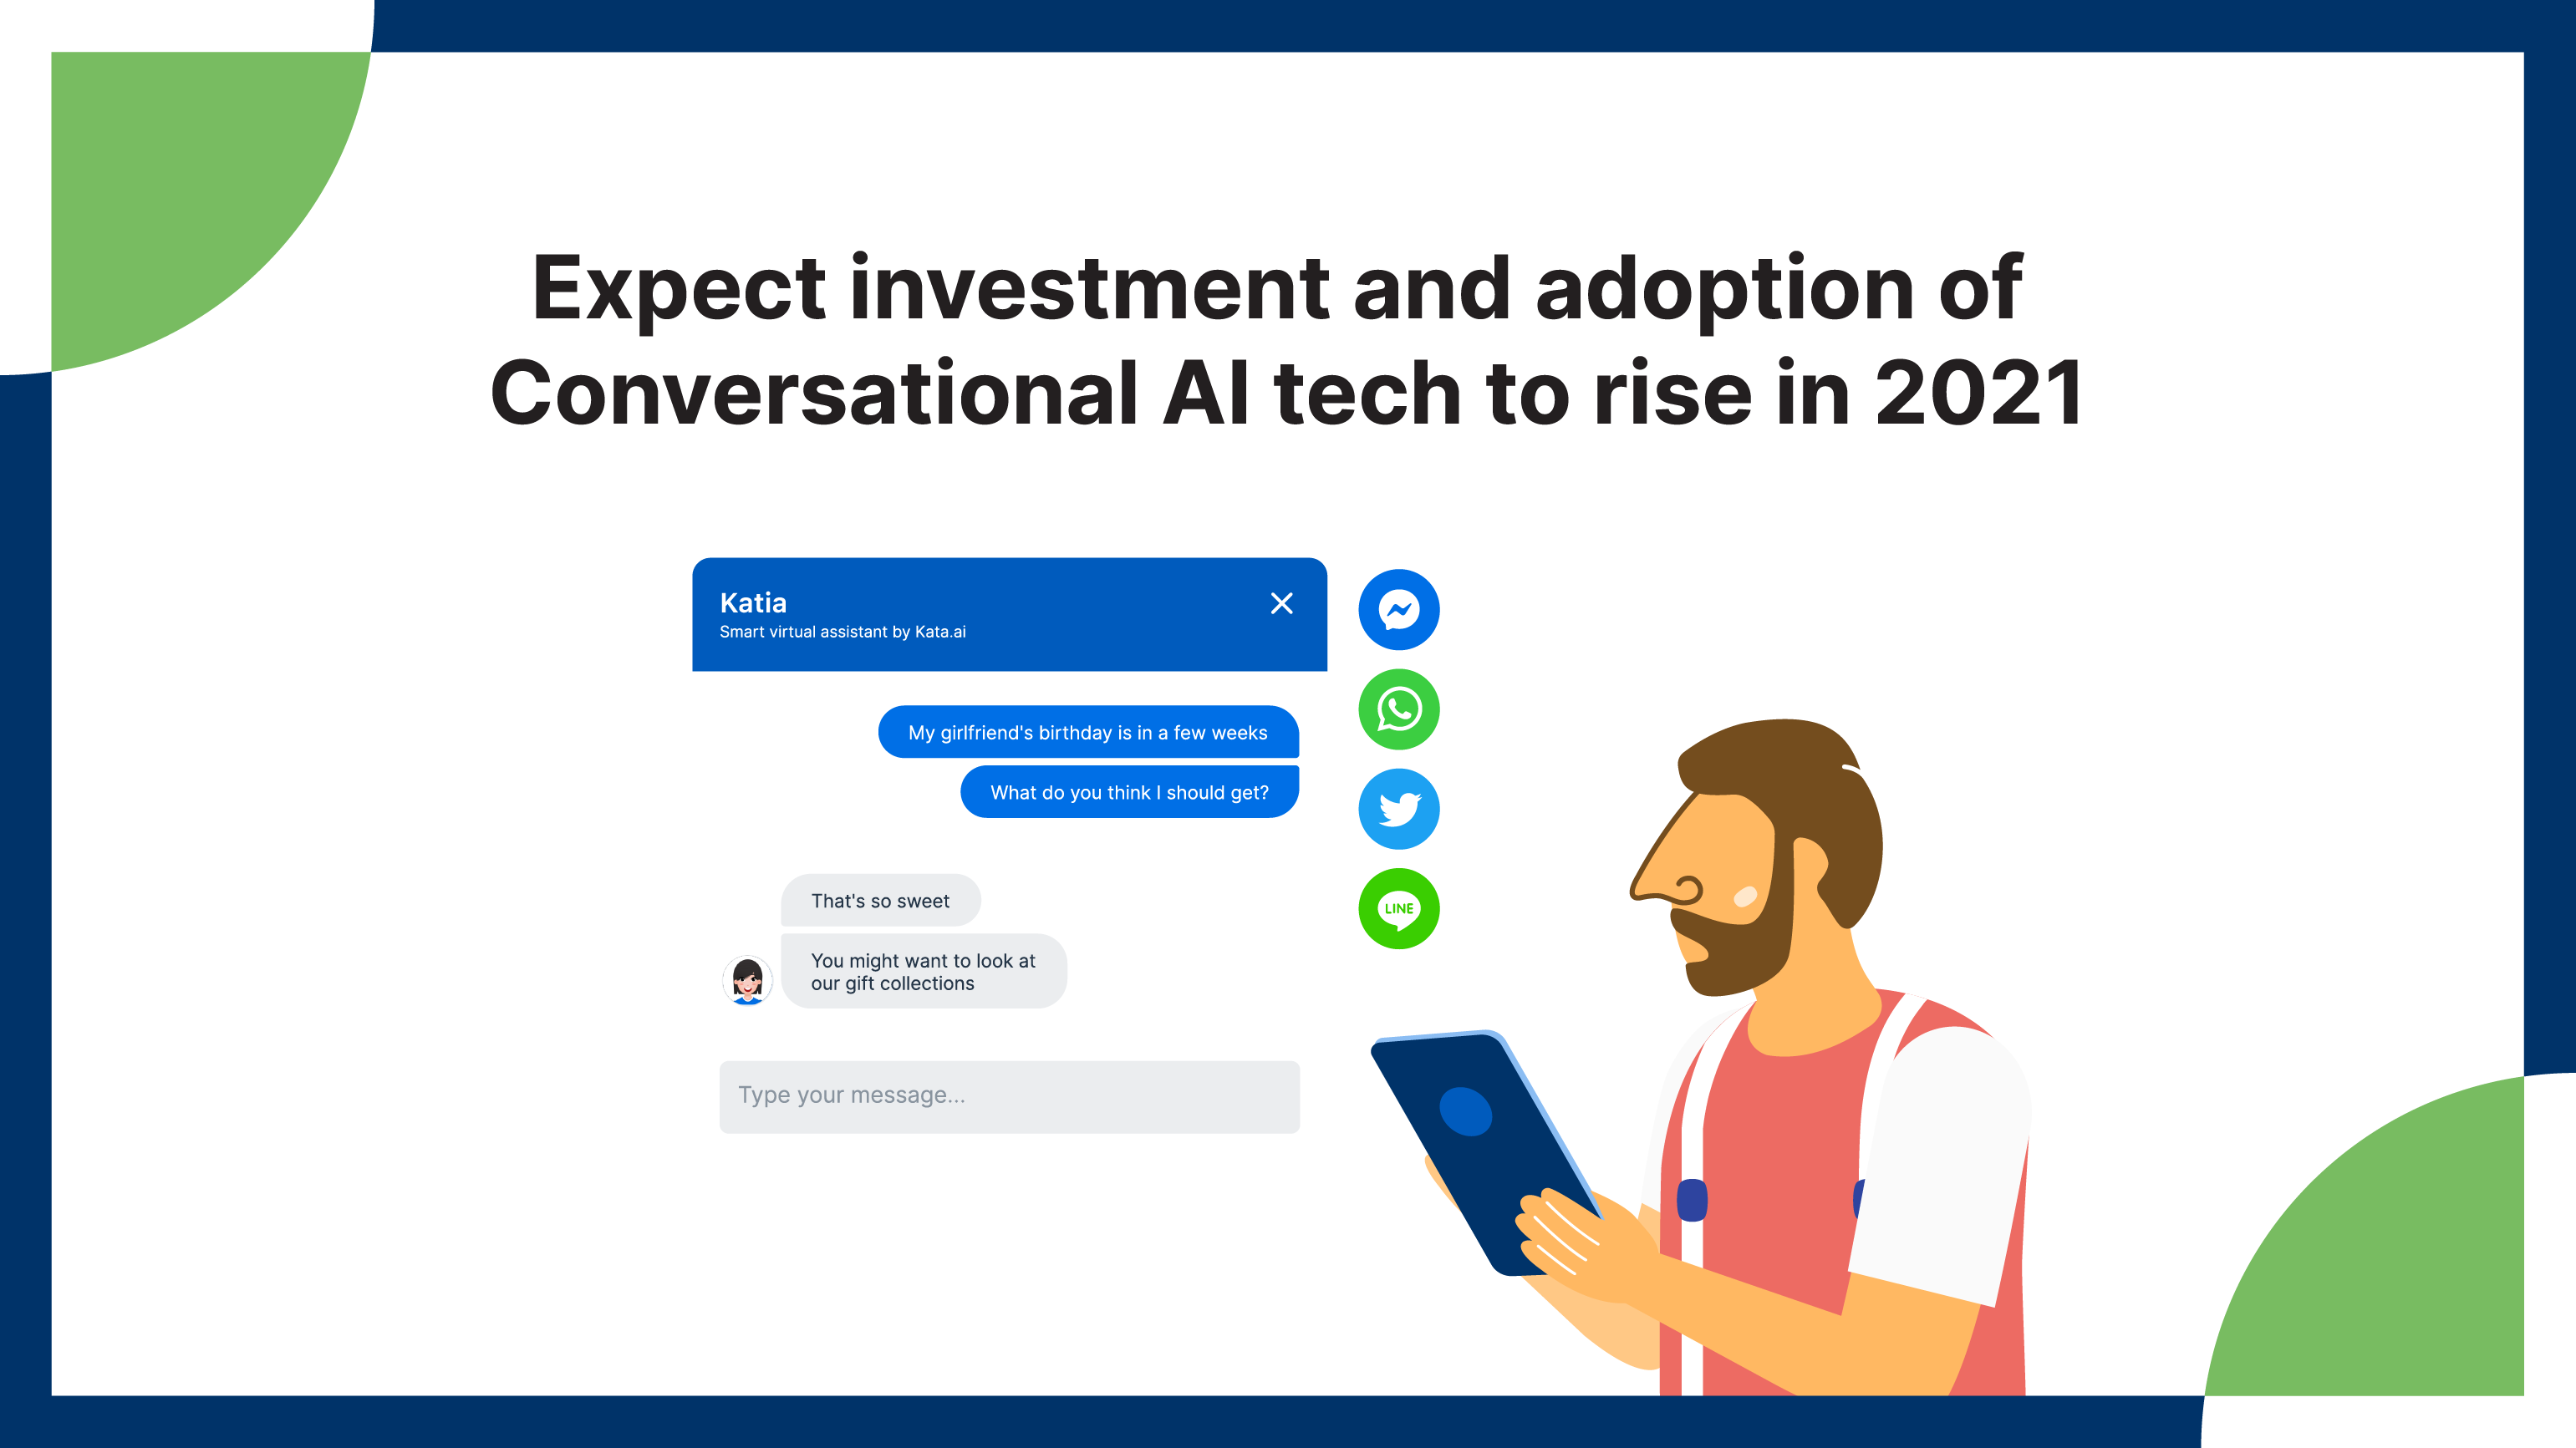 As the technology enters the space of convenience, expect investment in and adoption of conversational AI to rise in 2021.